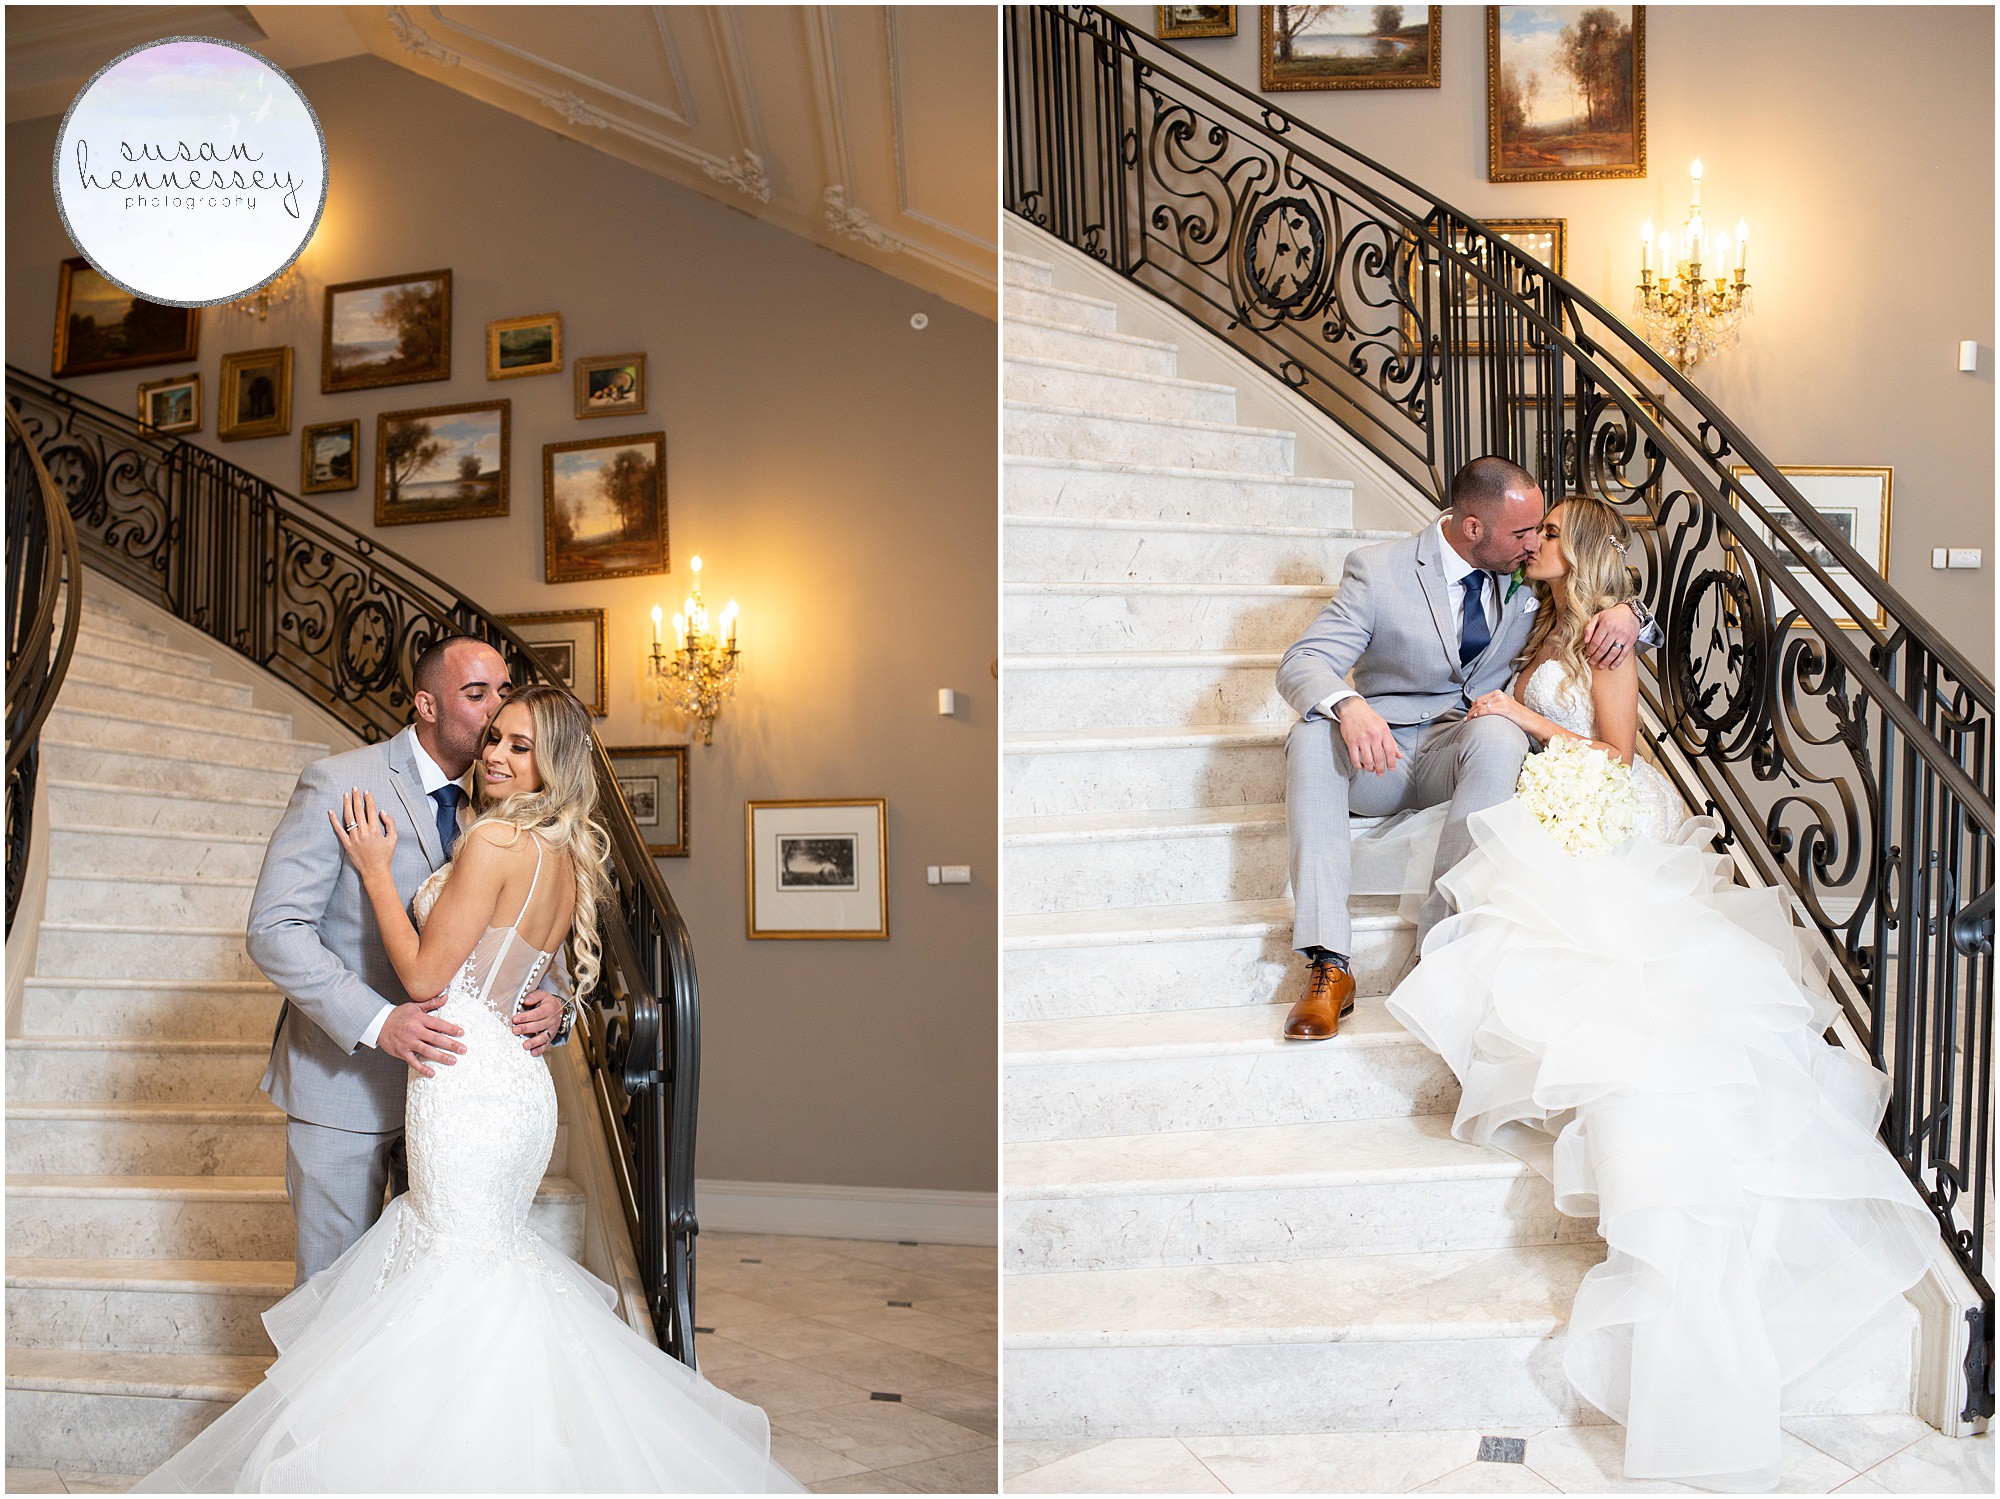 Bride and groom on staircase at the elegant and romantic Park Chateau.